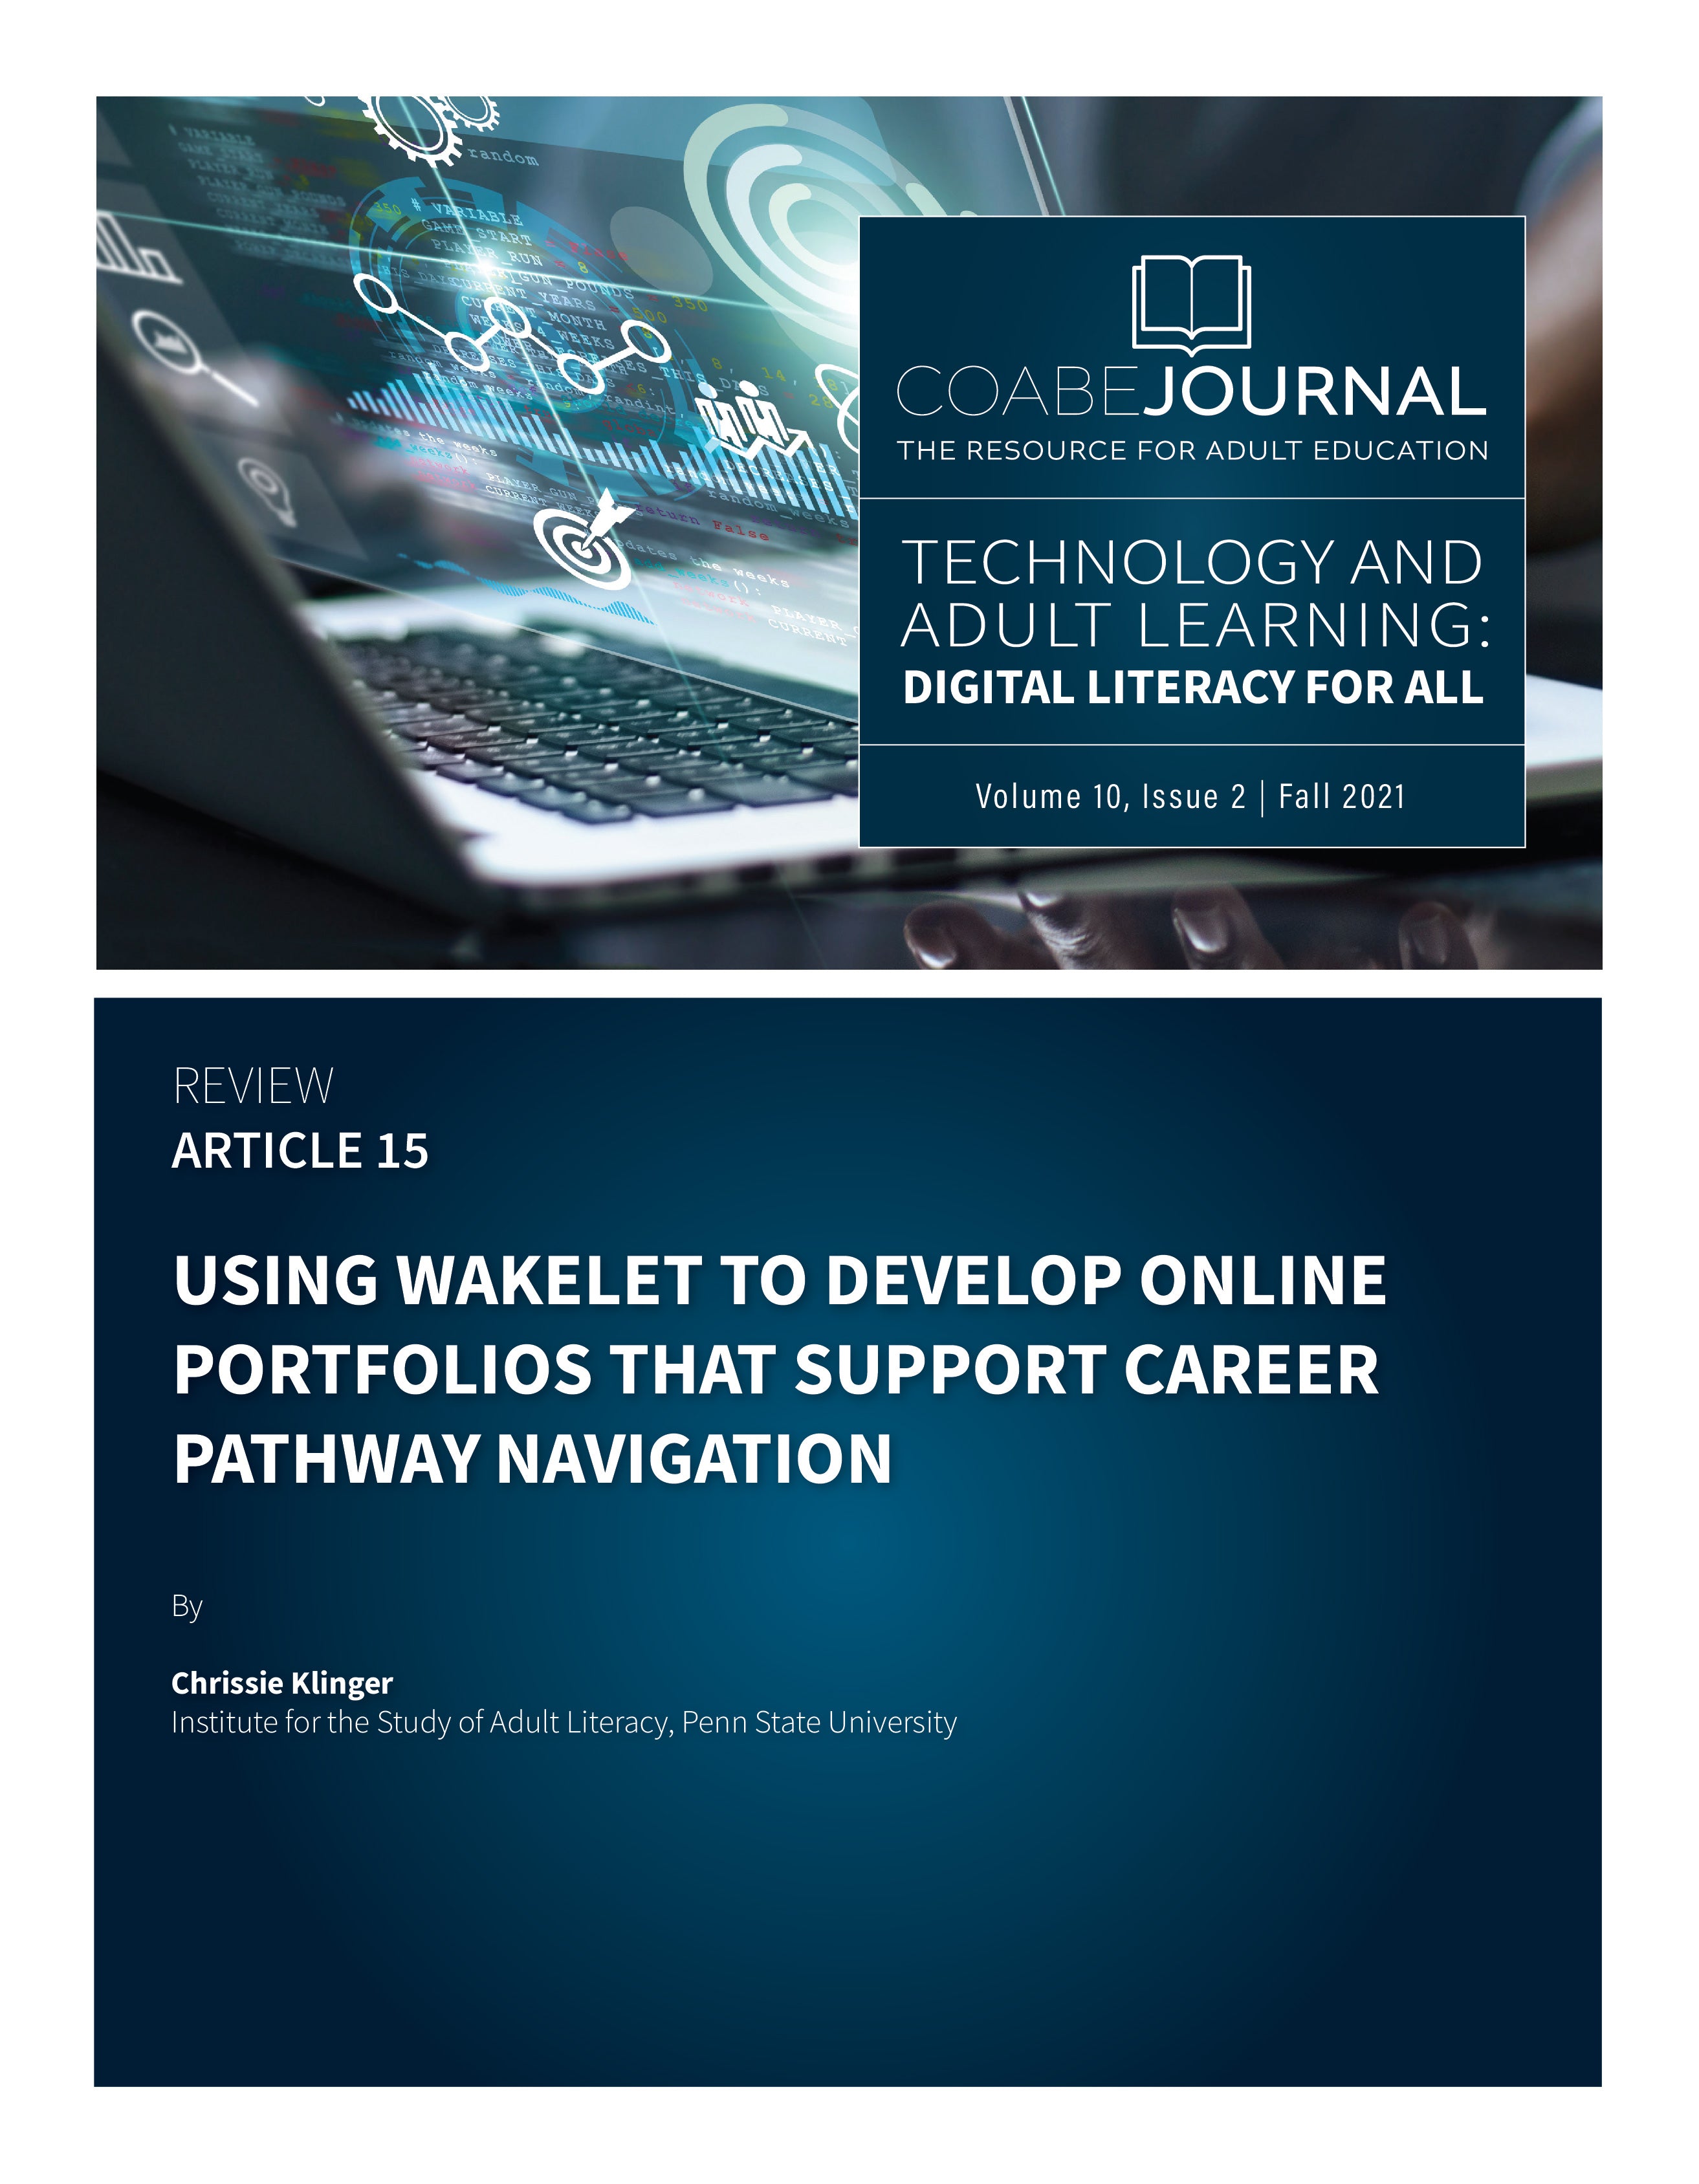 Article 15 | Using Wakelet to Develop Online Portfolios That Support Career Pathway Navigation